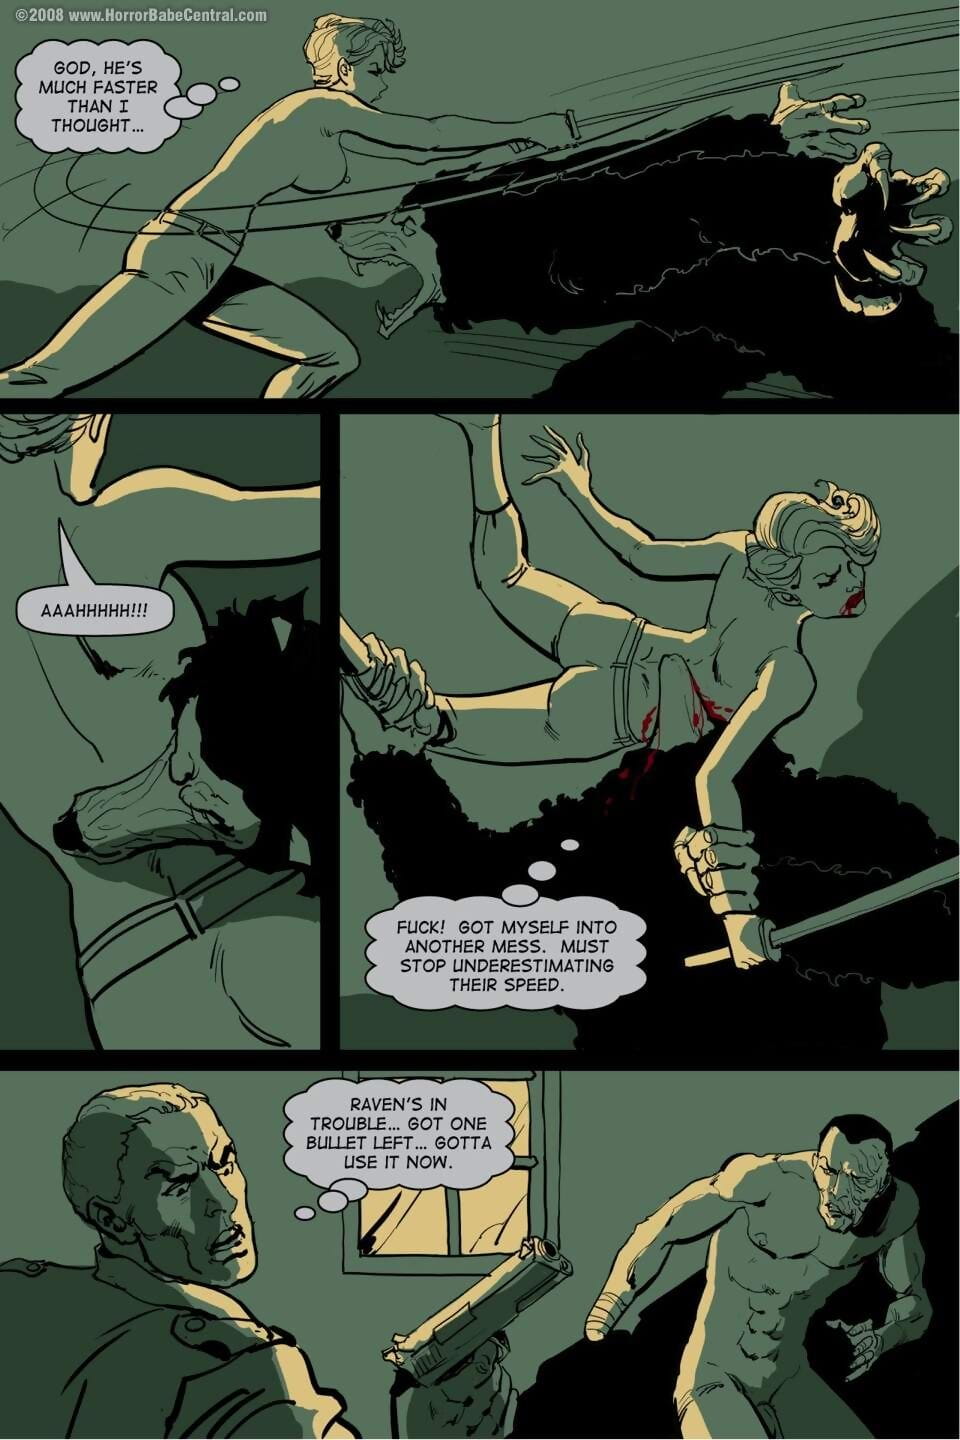 Vampire City - part 5 page 1